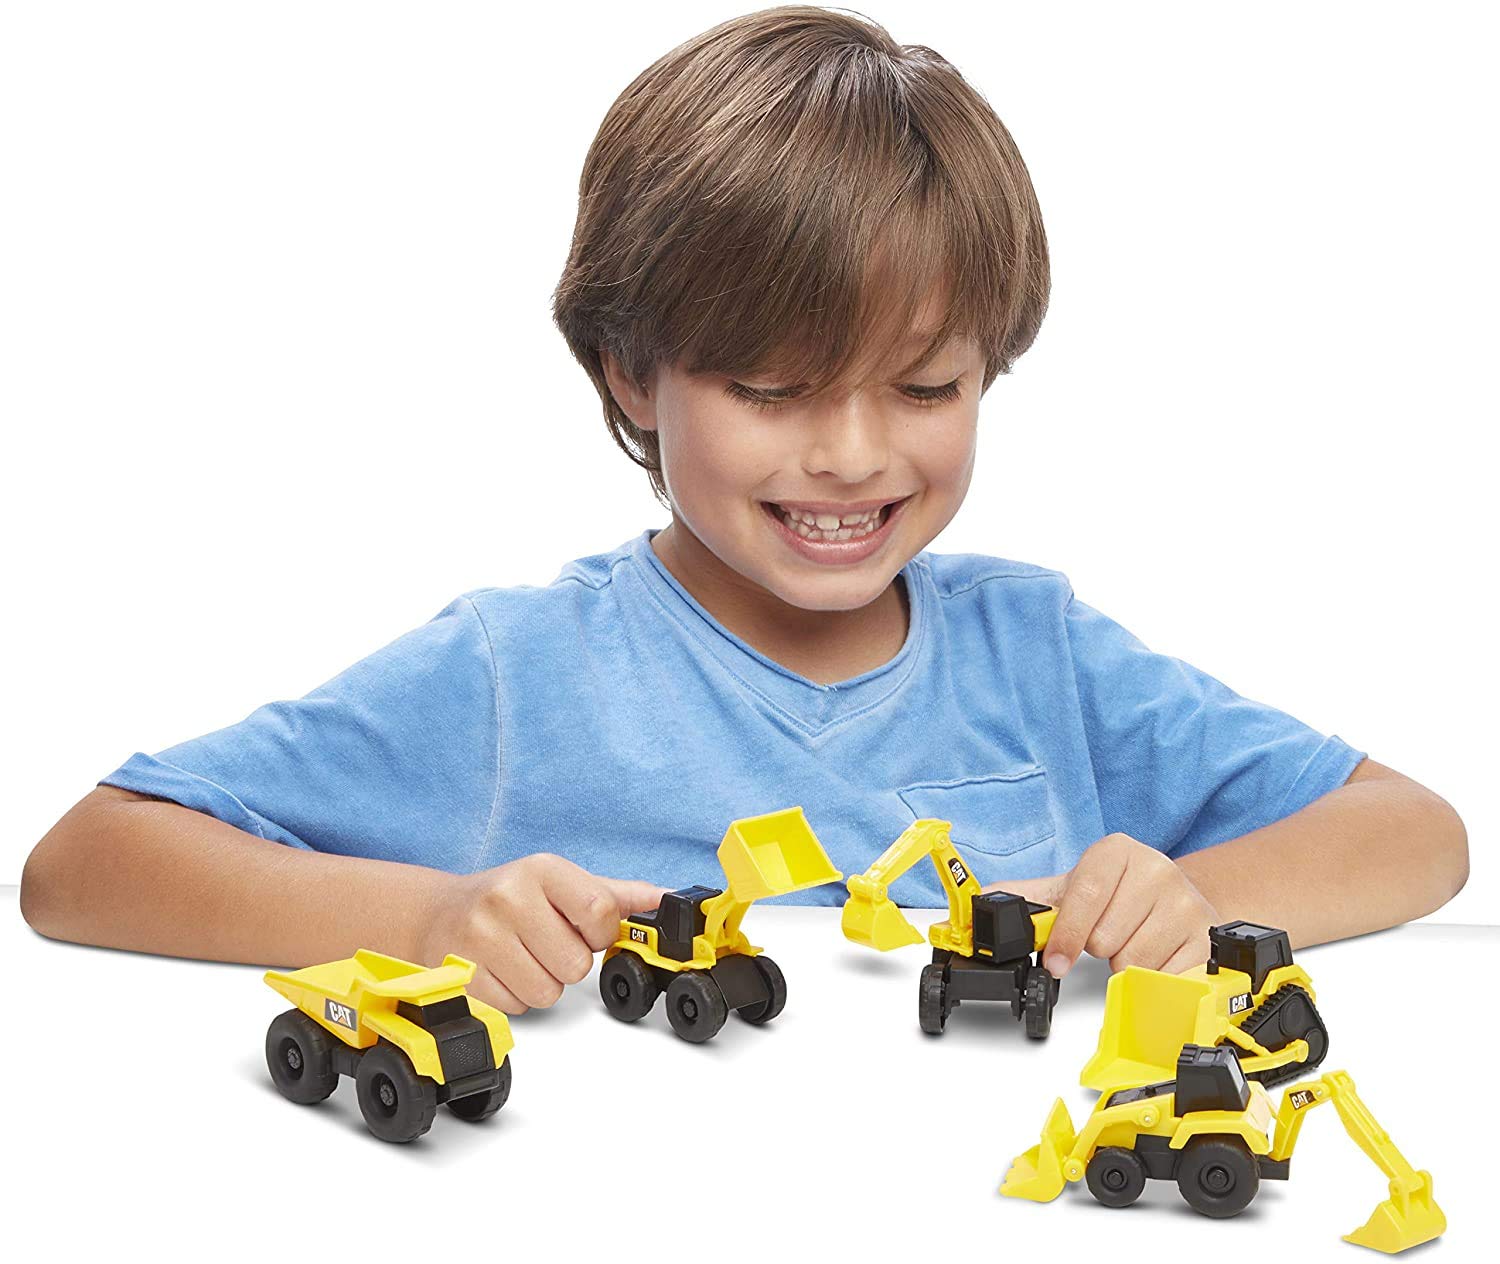 Caterpillar CAT Mini Machine Construction Truck Toy Cars Set of 5, Dump Truck, Bulldozer, Wheel Loader, Excavator and Backhoe Free-Wheeling Vehicles w/Moving Parts -Great Cake Toppers